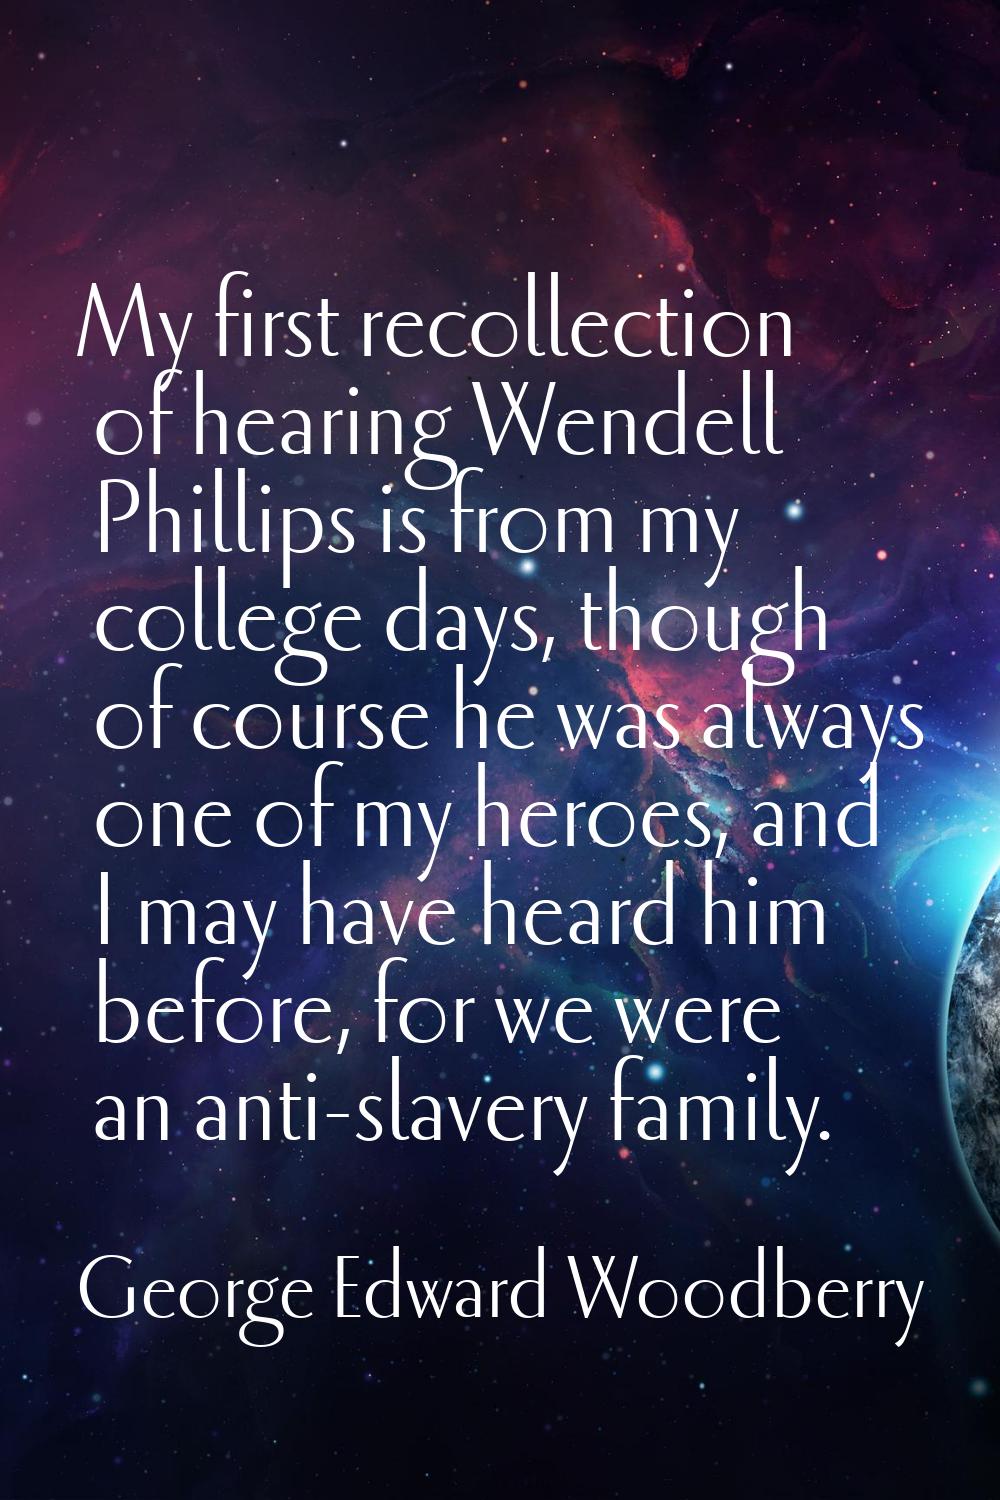 My first recollection of hearing Wendell Phillips is from my college days, though of course he was 